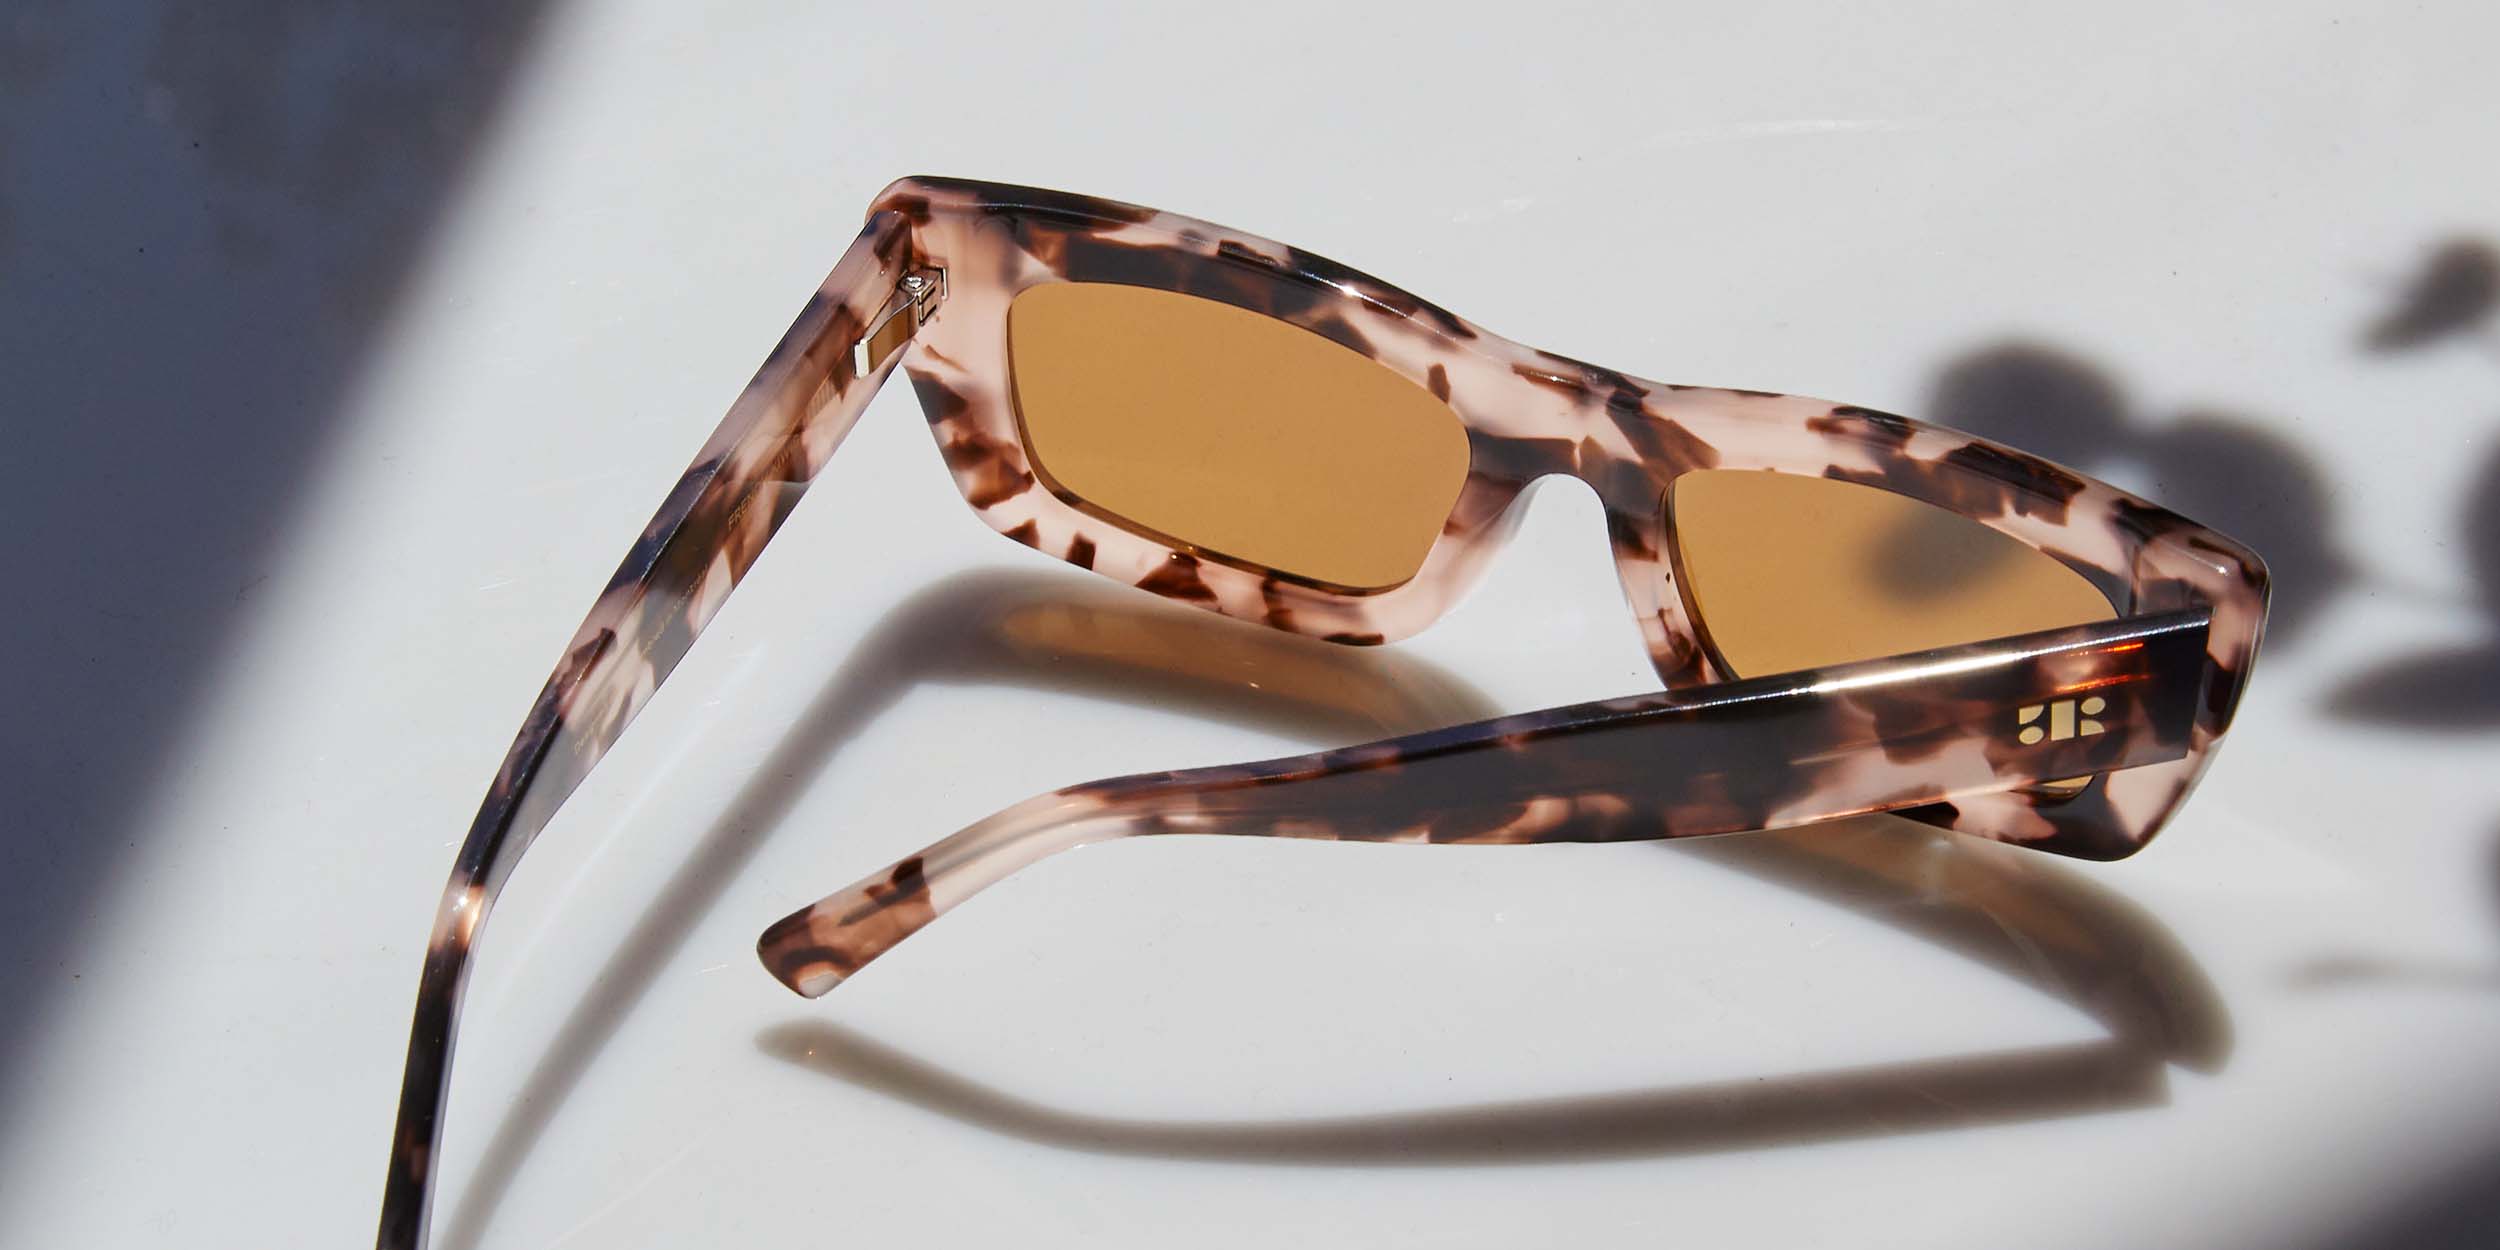 Photo Details of Agathe Sun Pink Tortoise Sun Glasses in a room